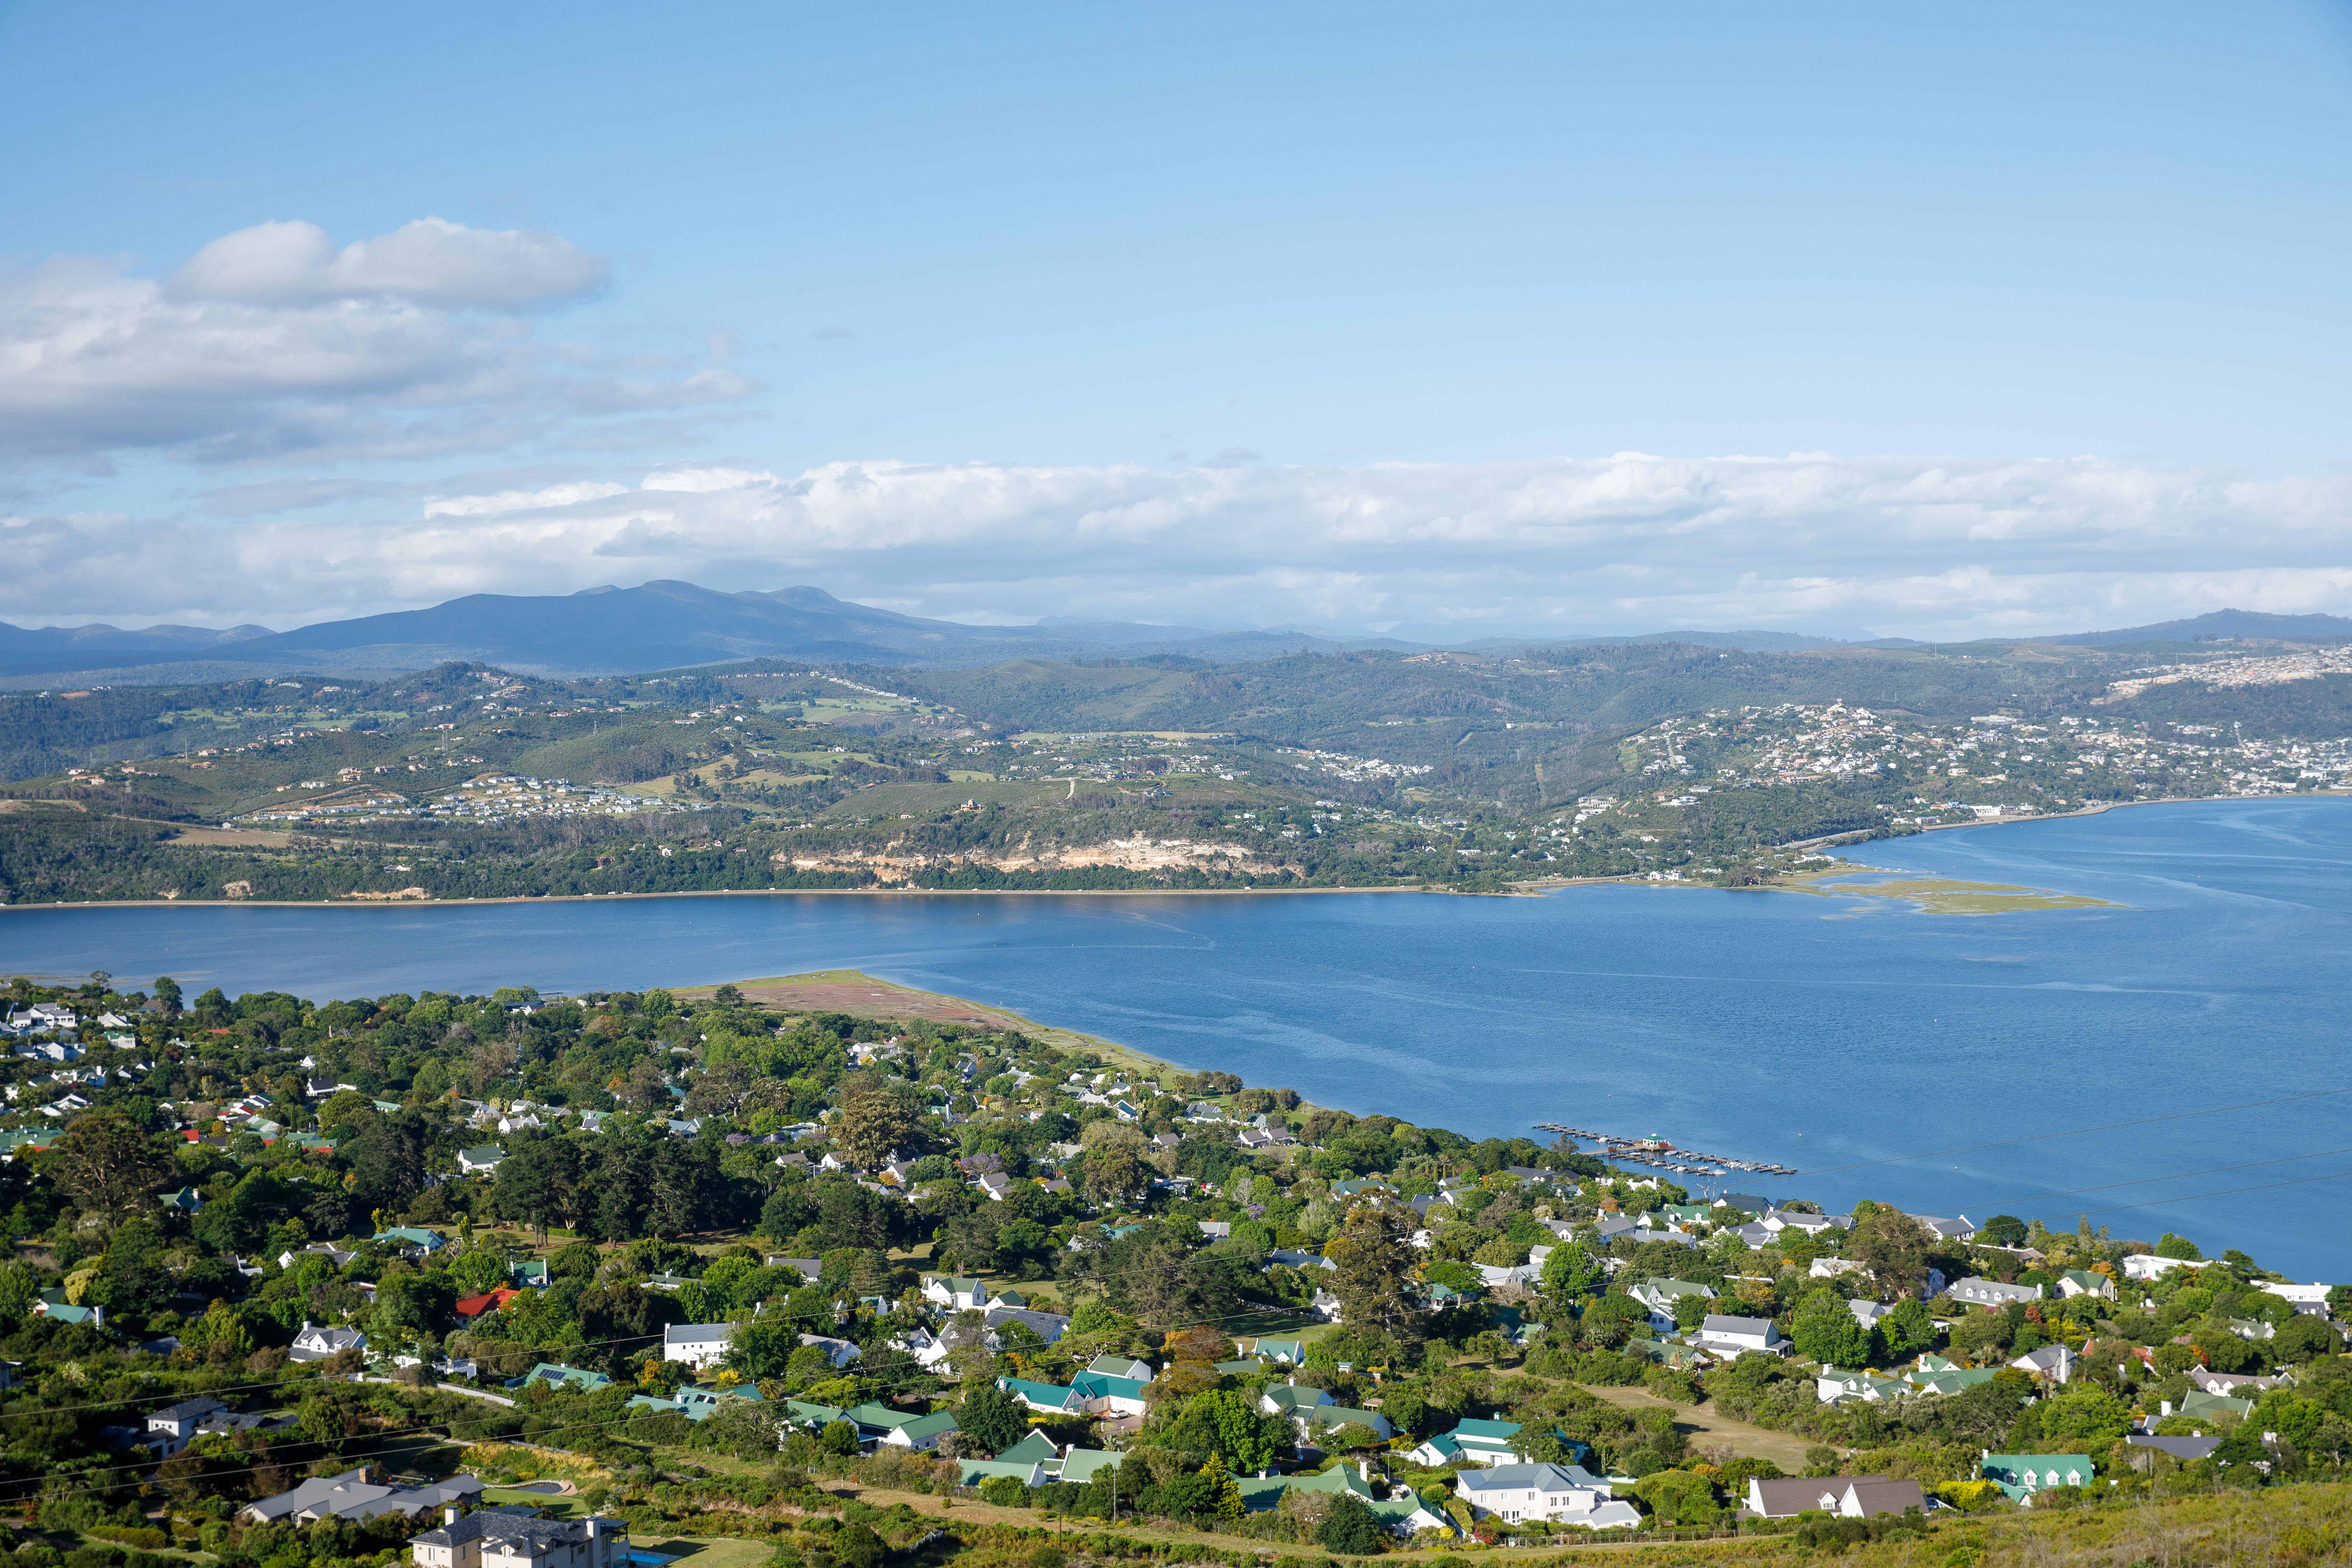 CAPE TOWN, SOUTH AFRICA - NOVEMBER 29: A general view of Knysna Lagoon viewed from Brenton on Sea on November 29, 2021 in Cape Town, South Africa. The lagoon is one of the most prominent landscape features in the Greater Knysna area. (Photo by Gallo Images/ER Lombard)